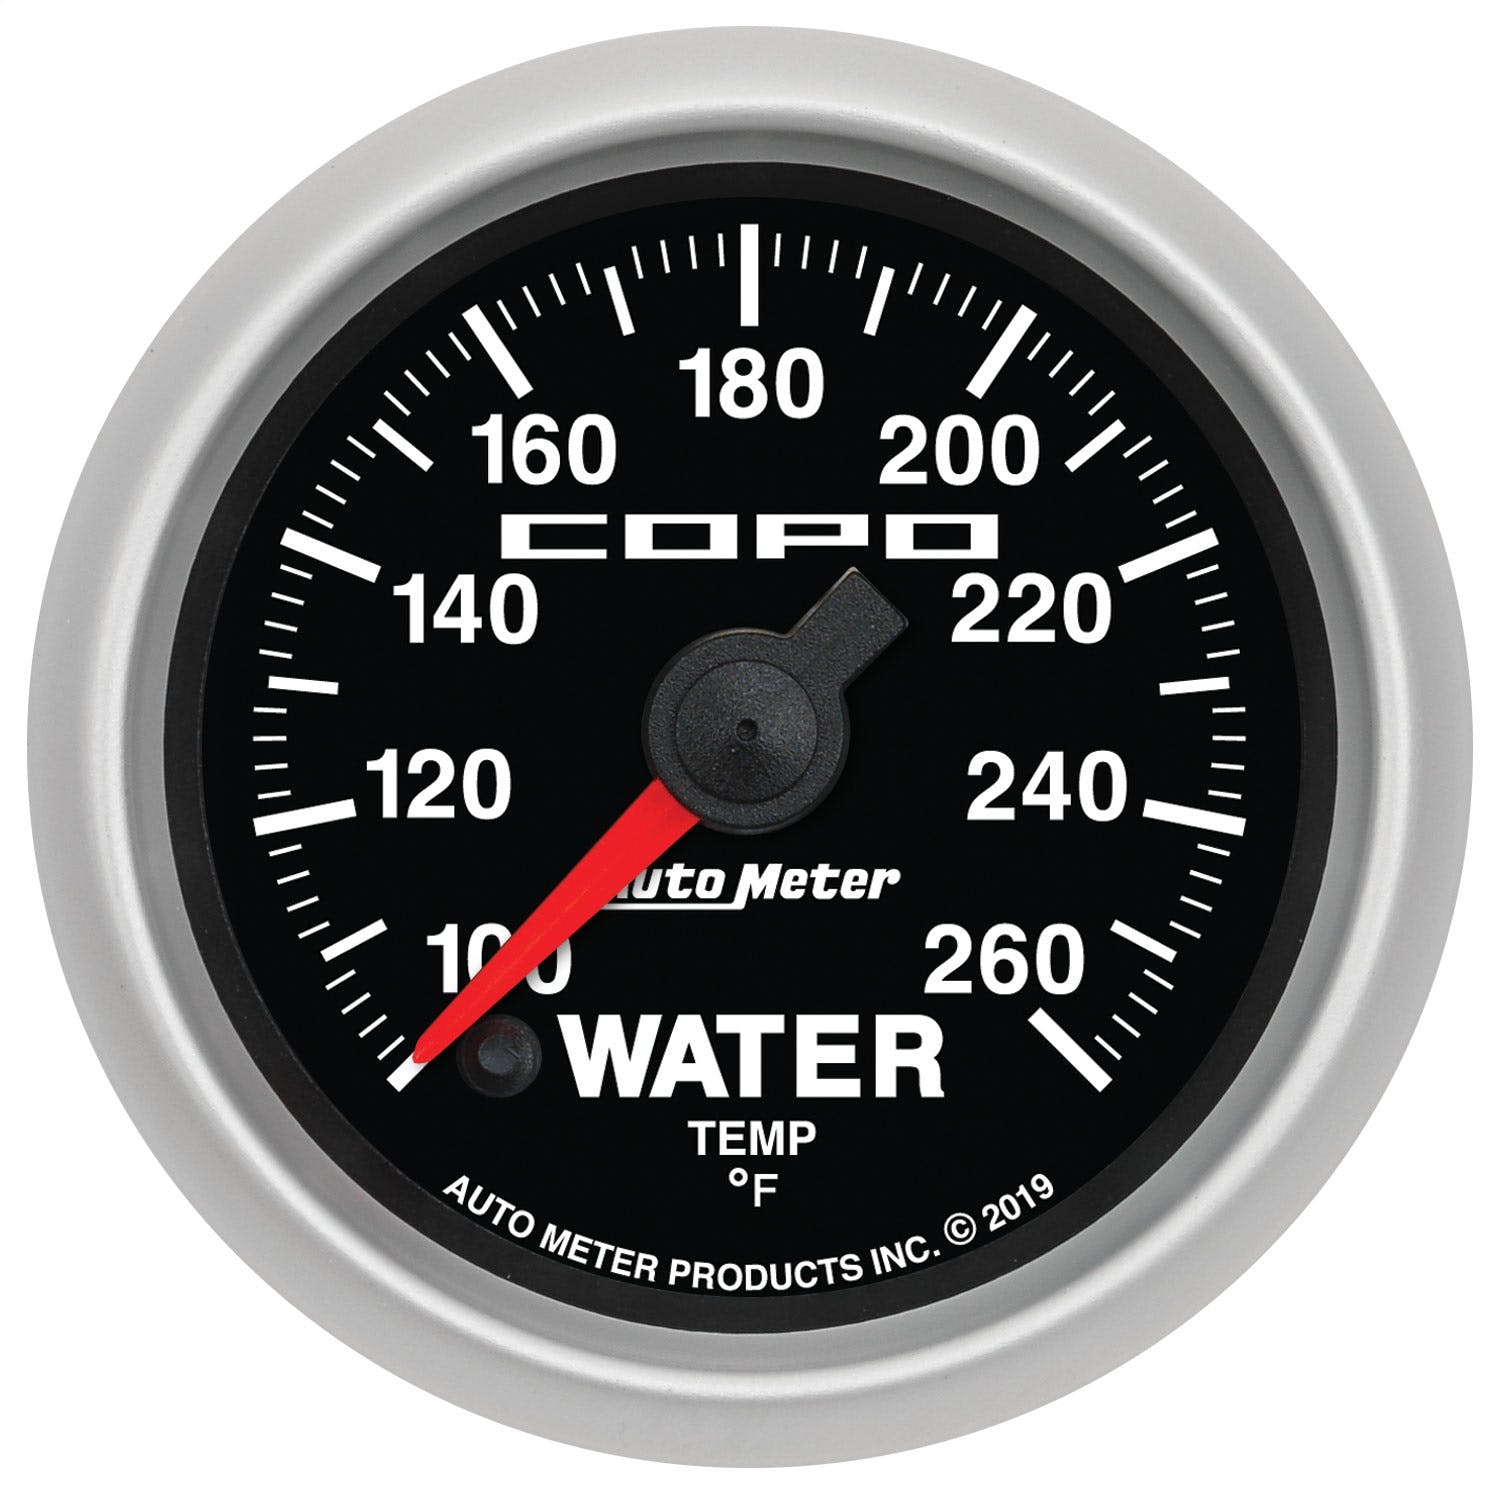 AutoMeter Products 880875 Water Temp Gauge, 2 1/16 100-260° F, Digital Stepper Motor, COPO